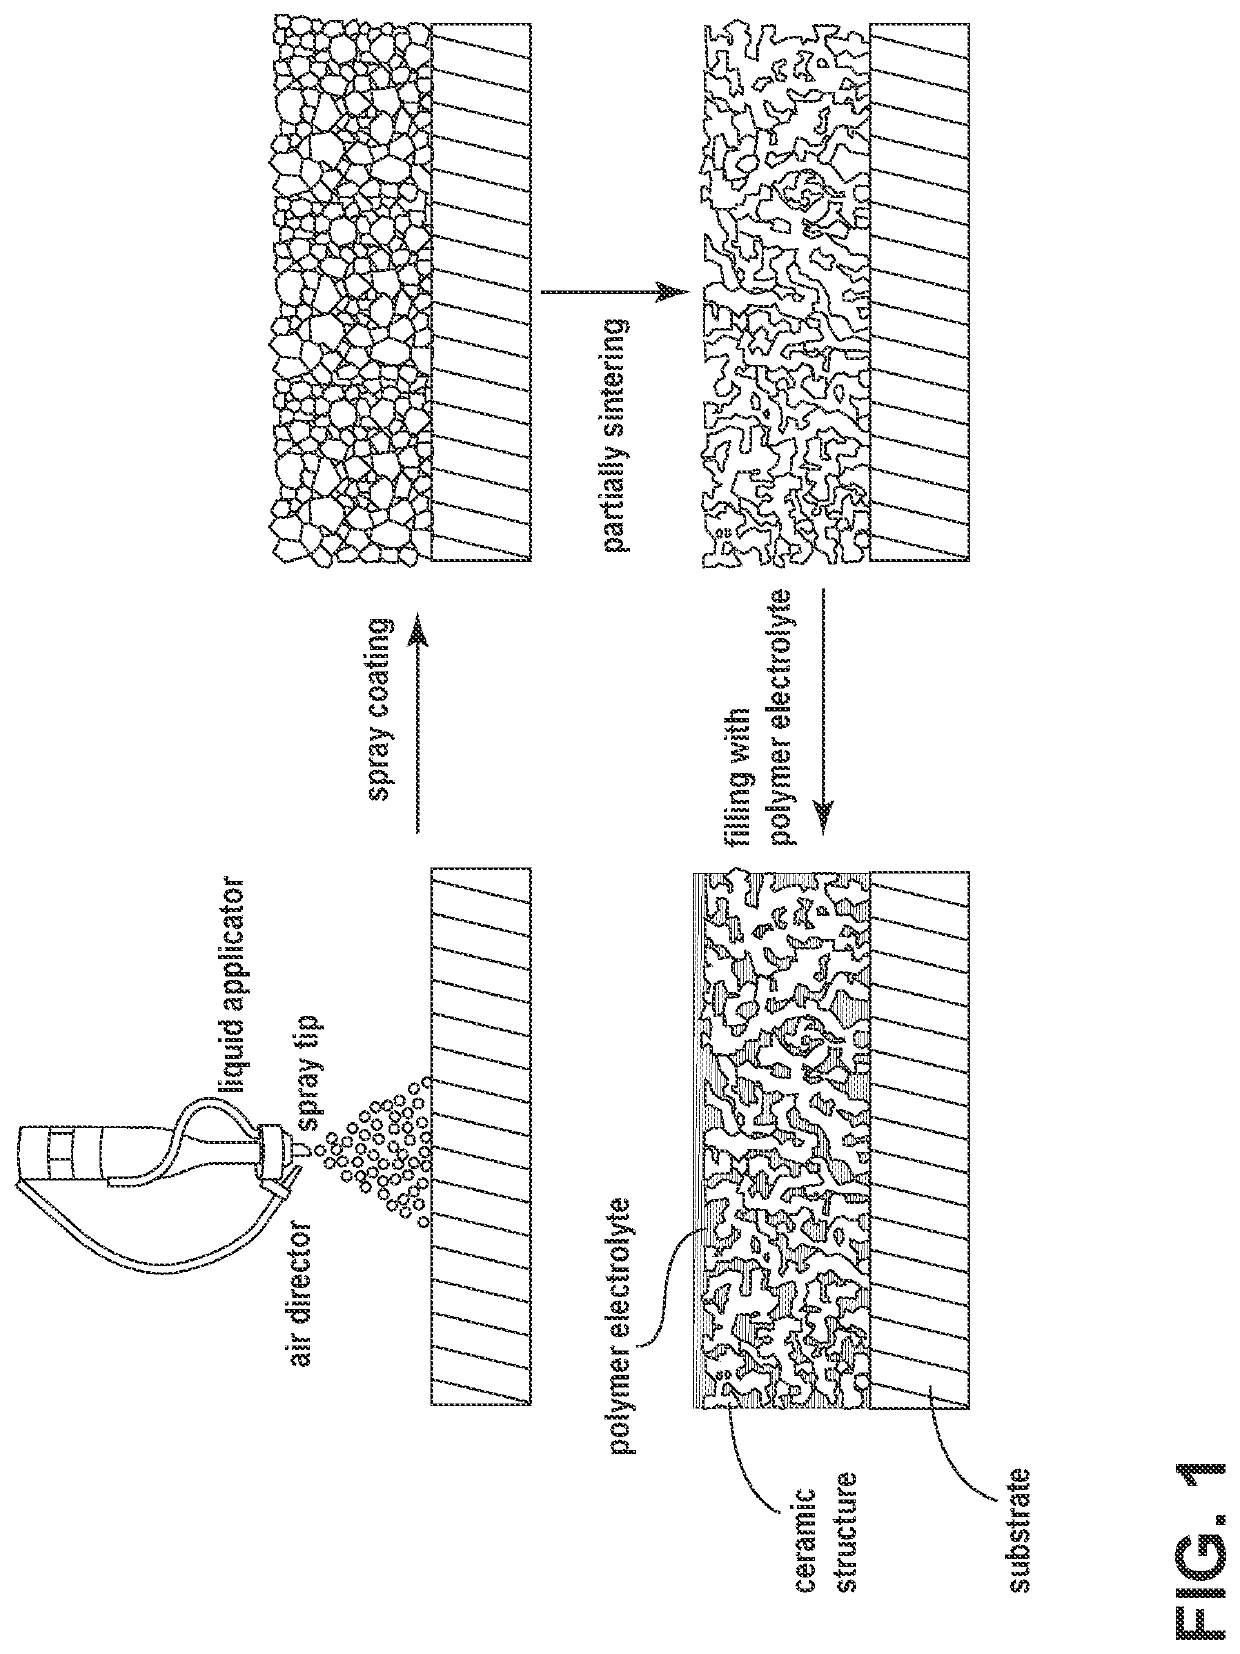 Method of manufacturing a thin film composite solid electrolyte